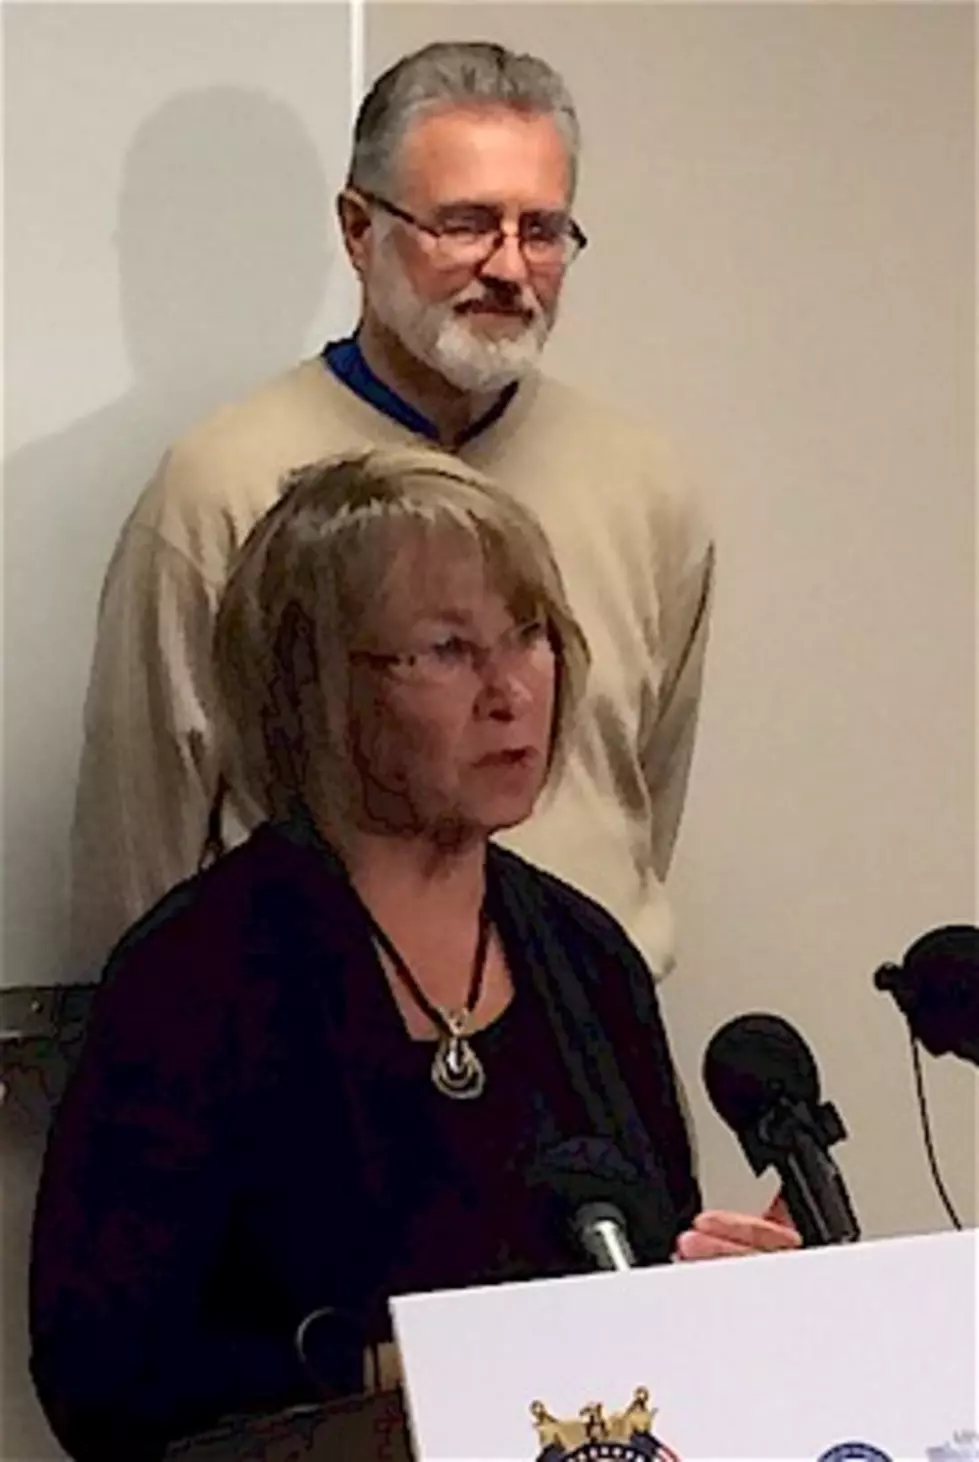 Statement on Danny Heinrich Arrest from Jerry and Patty Wetterling [READ]